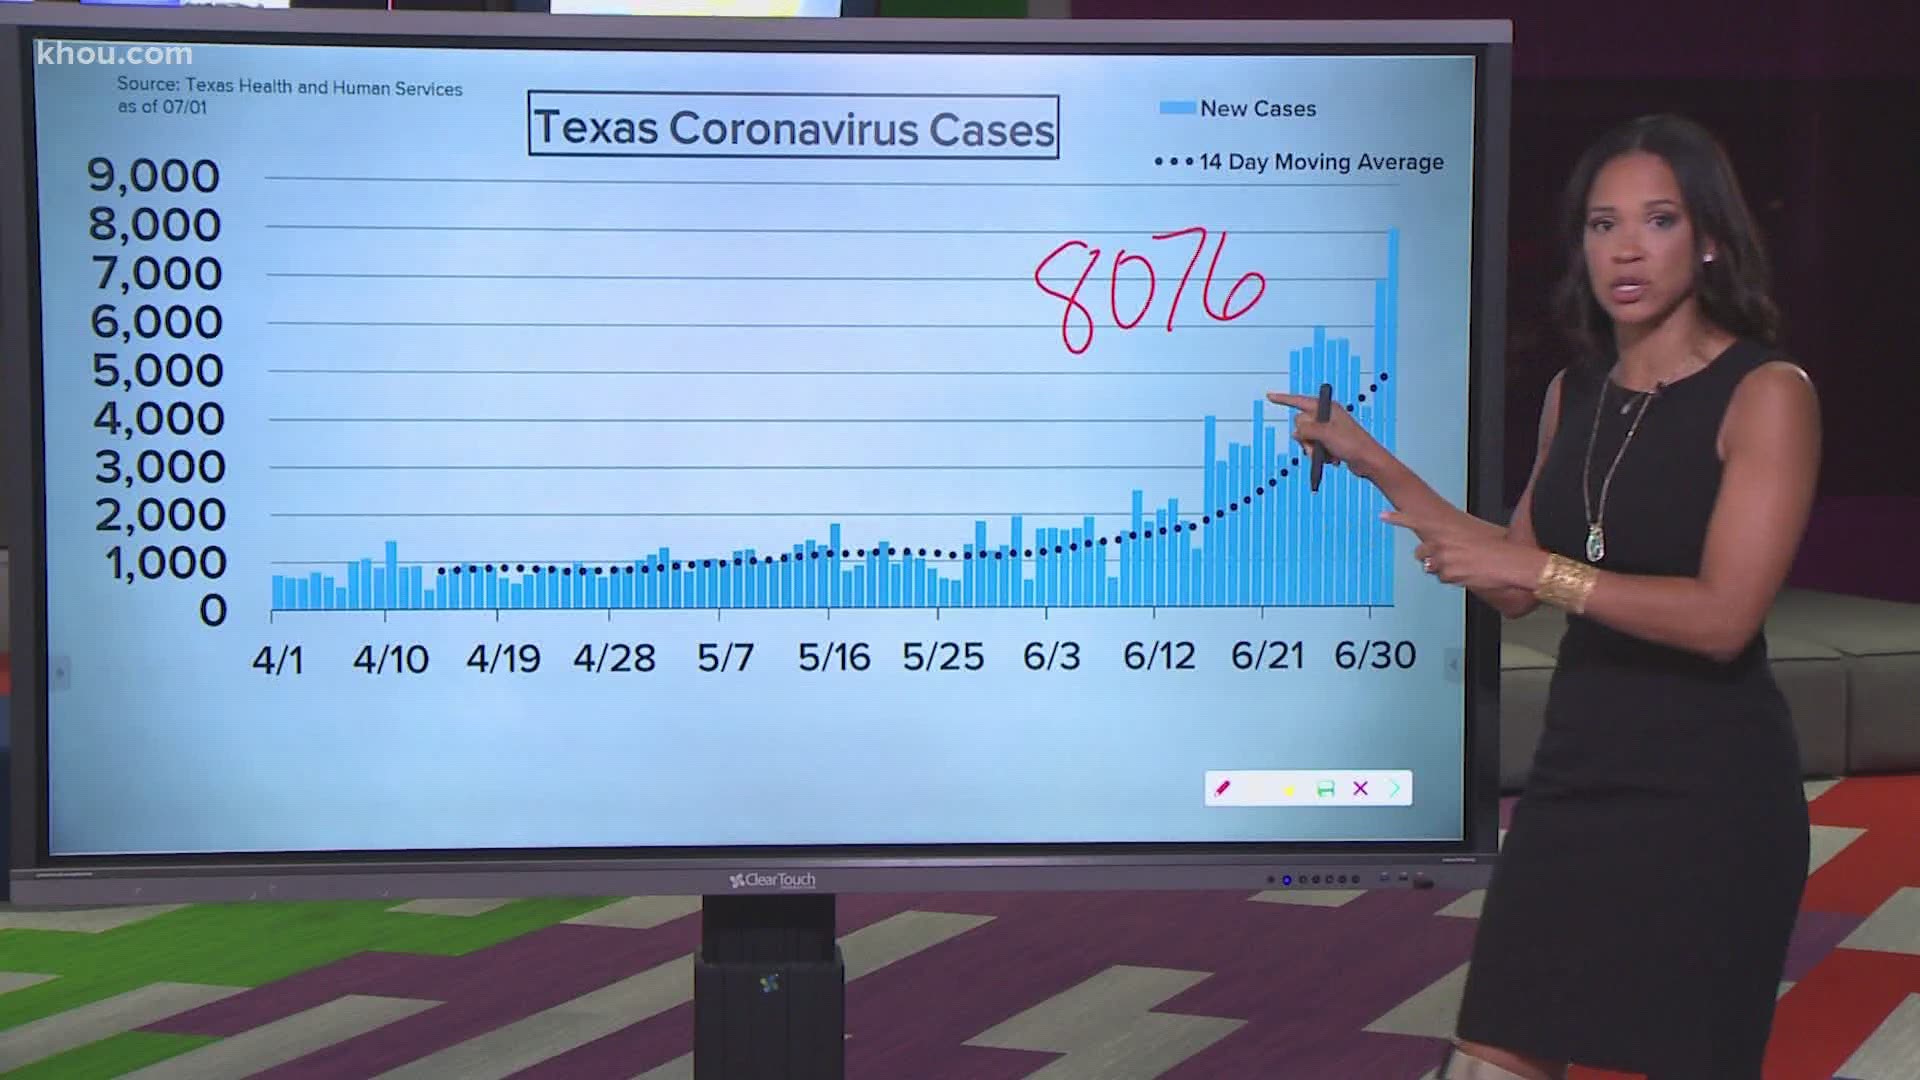 Coronavirus numbers surged to new highs Wednesday with Texas reporting more than 8,000 cases.